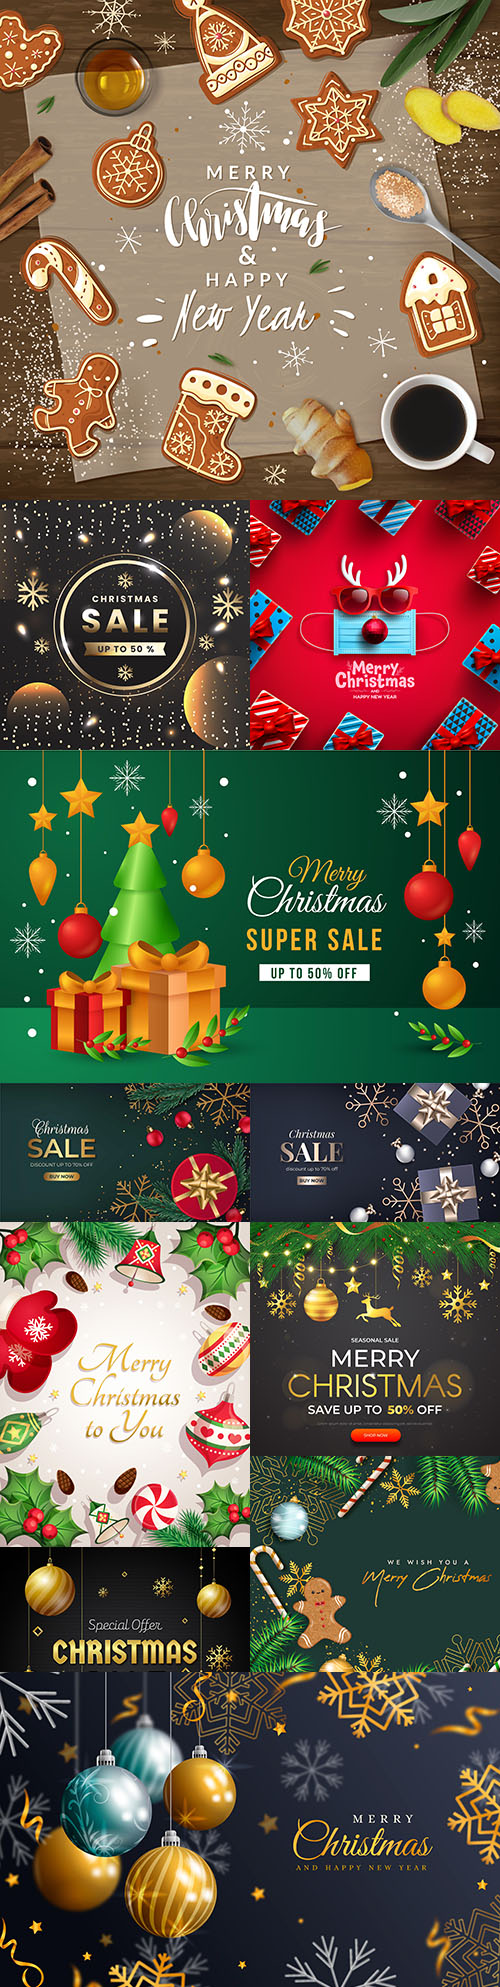 Christmas sale and New Year background realistic illustration
